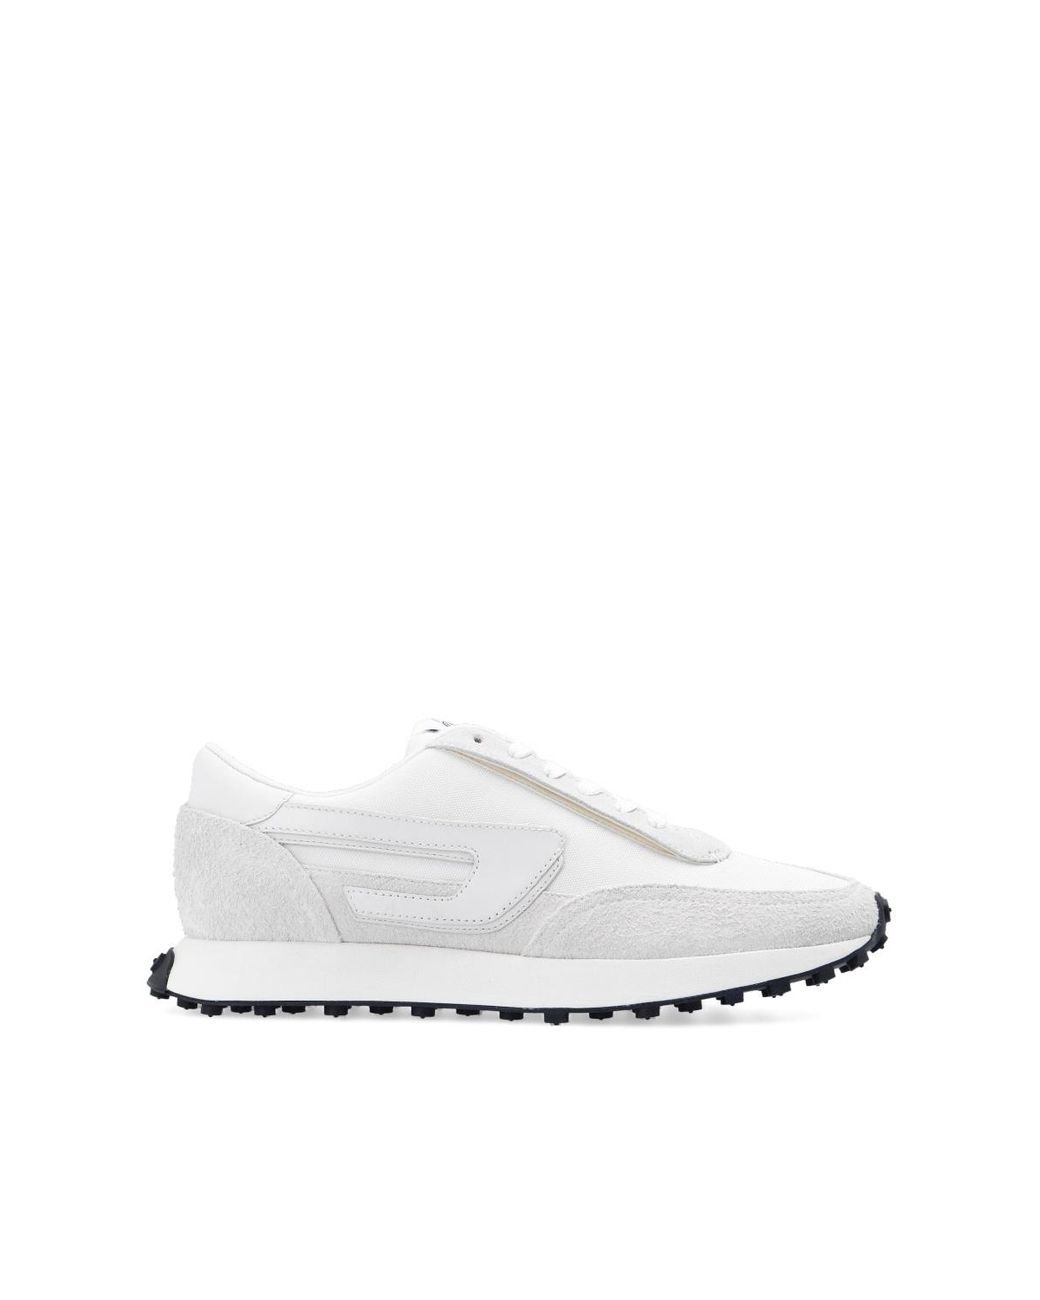 DIESEL Leather 's-racer Lc' Sneakers in White | Lyst